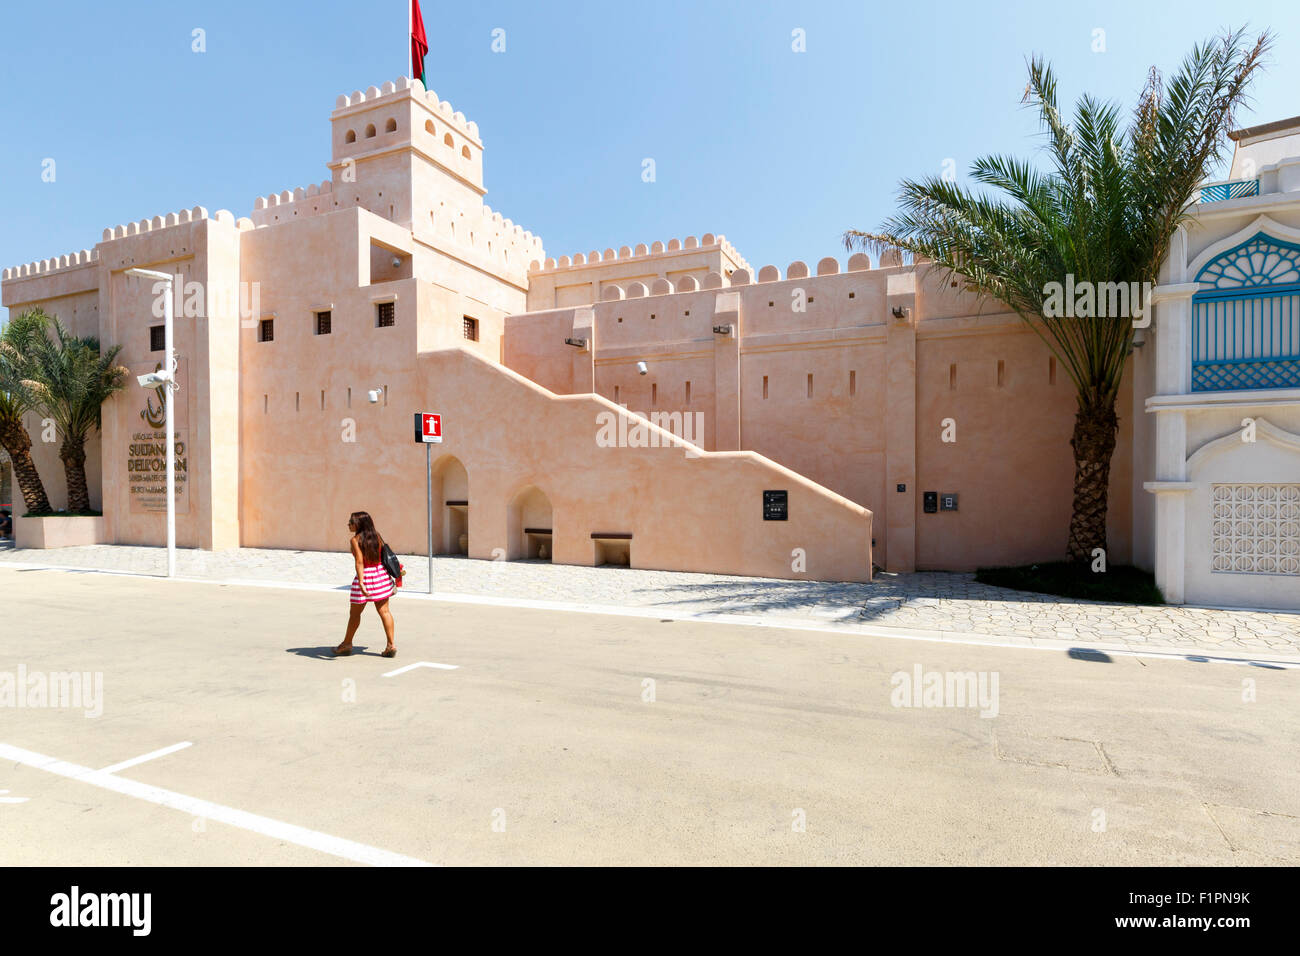 Milan, Italy, 12 August 2015: Detail of the Oman pavilion at the exhibition Expo 2015 Italy. Stock Photo